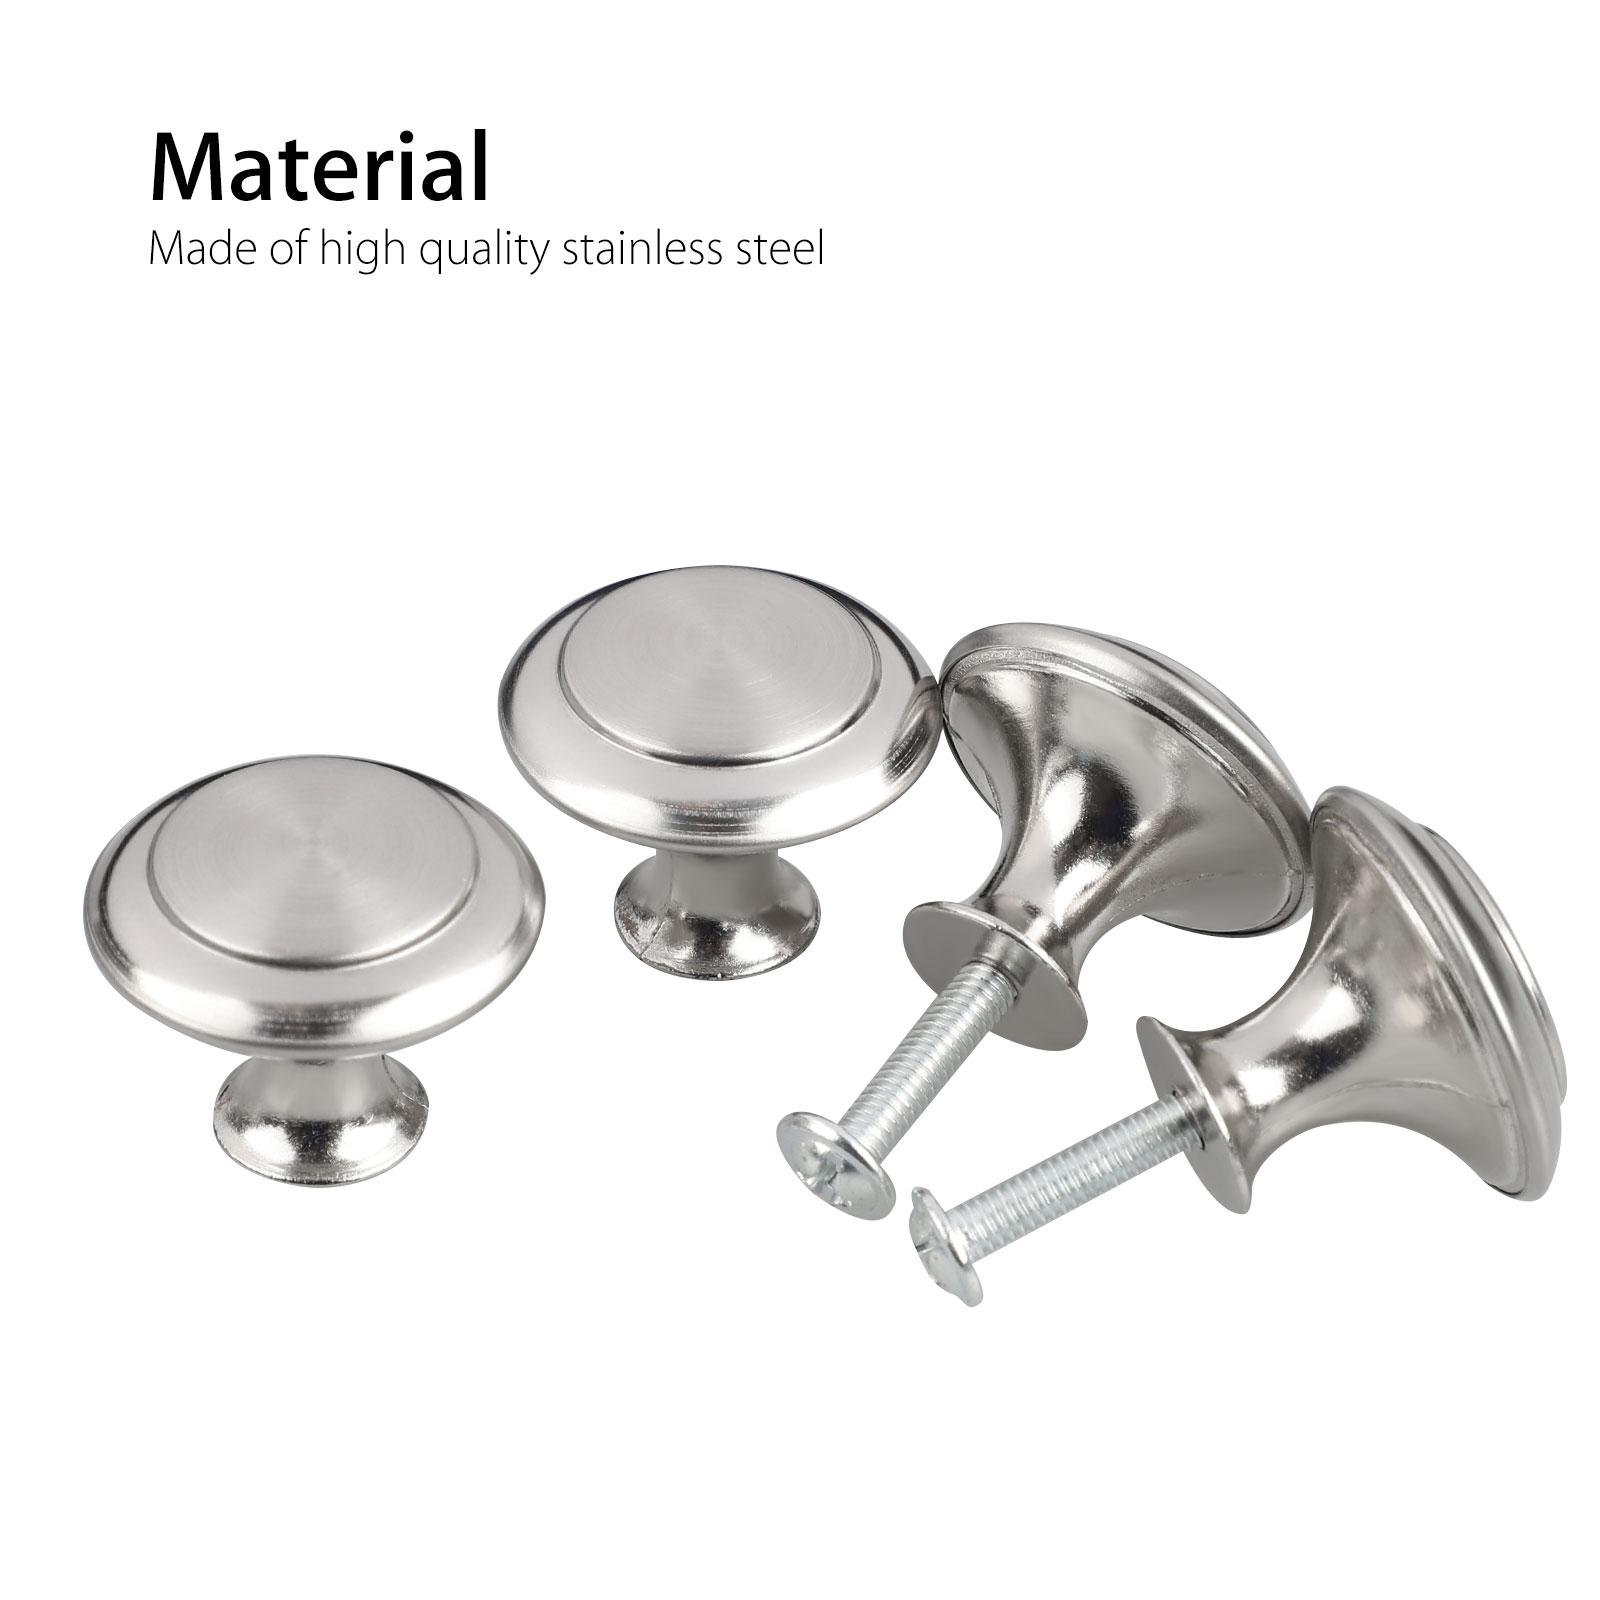 20pcs Kitchen Cabinet Heavy Pull Knobs, Brushed Nickel Cabinet Knobs Cupboard Door Knobs Kitchen Hardware Round Pull Knobs for Bathroom Drawer, Silver - image 5 of 8